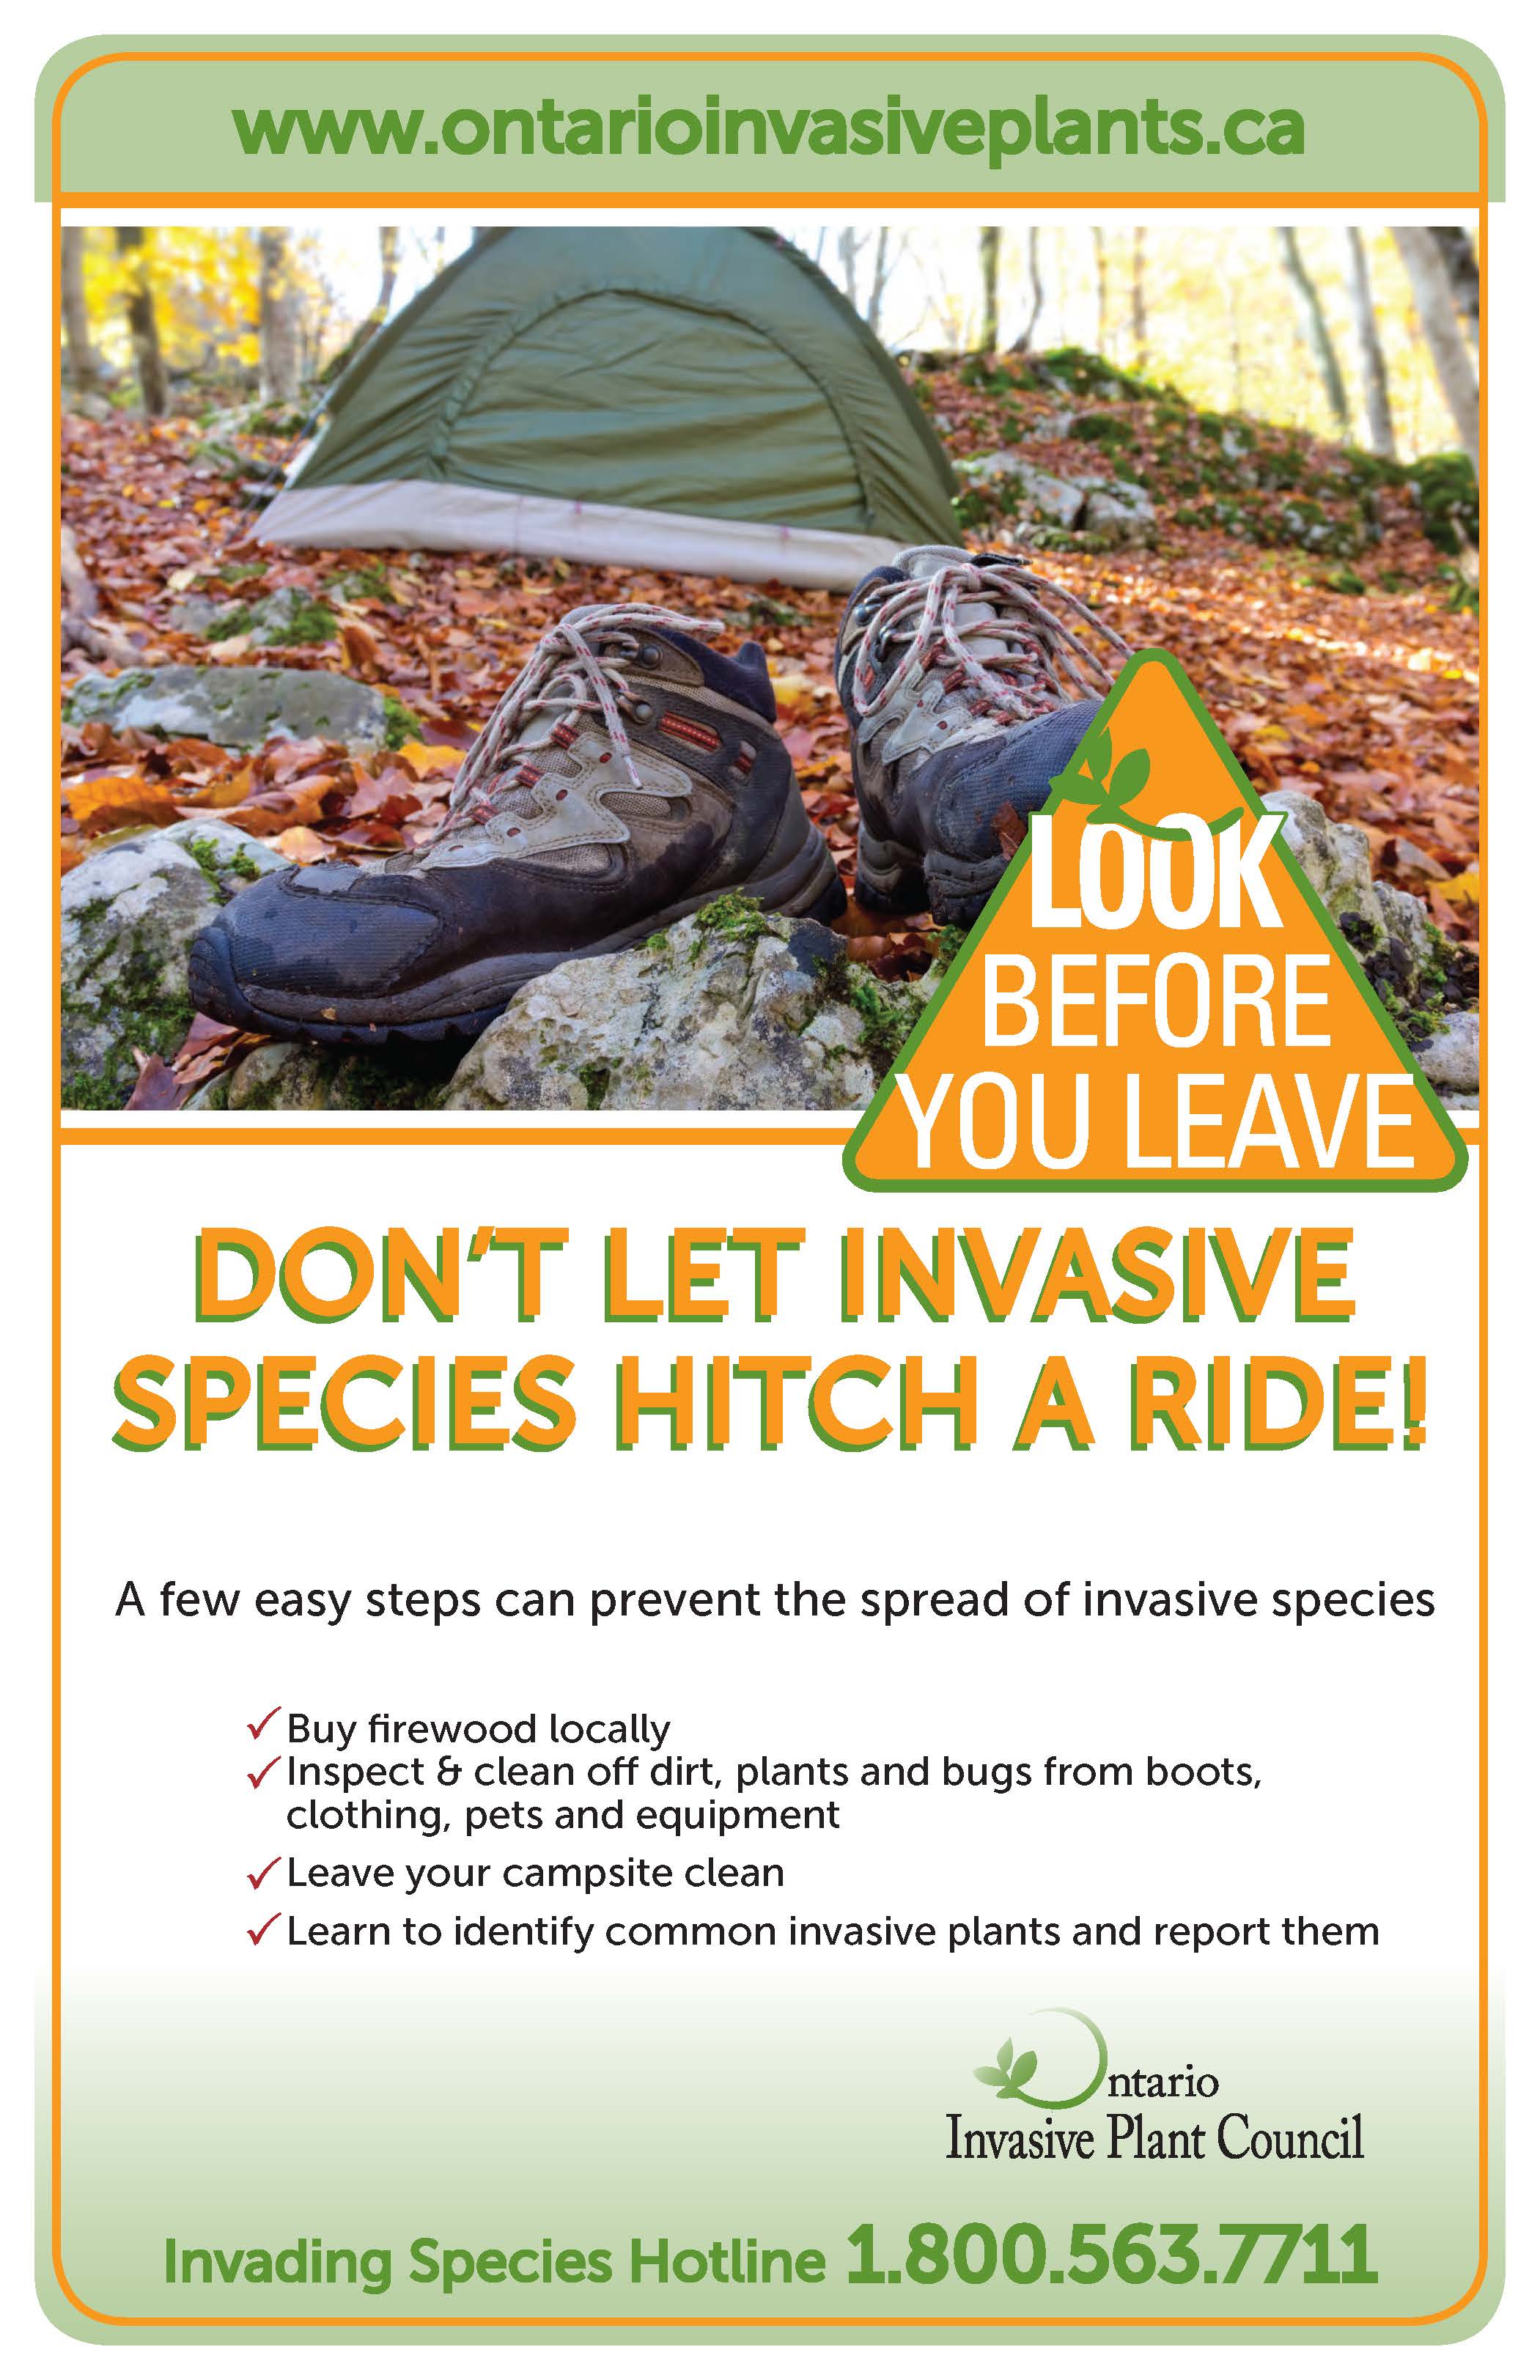 Leave the camp. Invasive species. Keep the Campsite clean. Stories about invasive species.